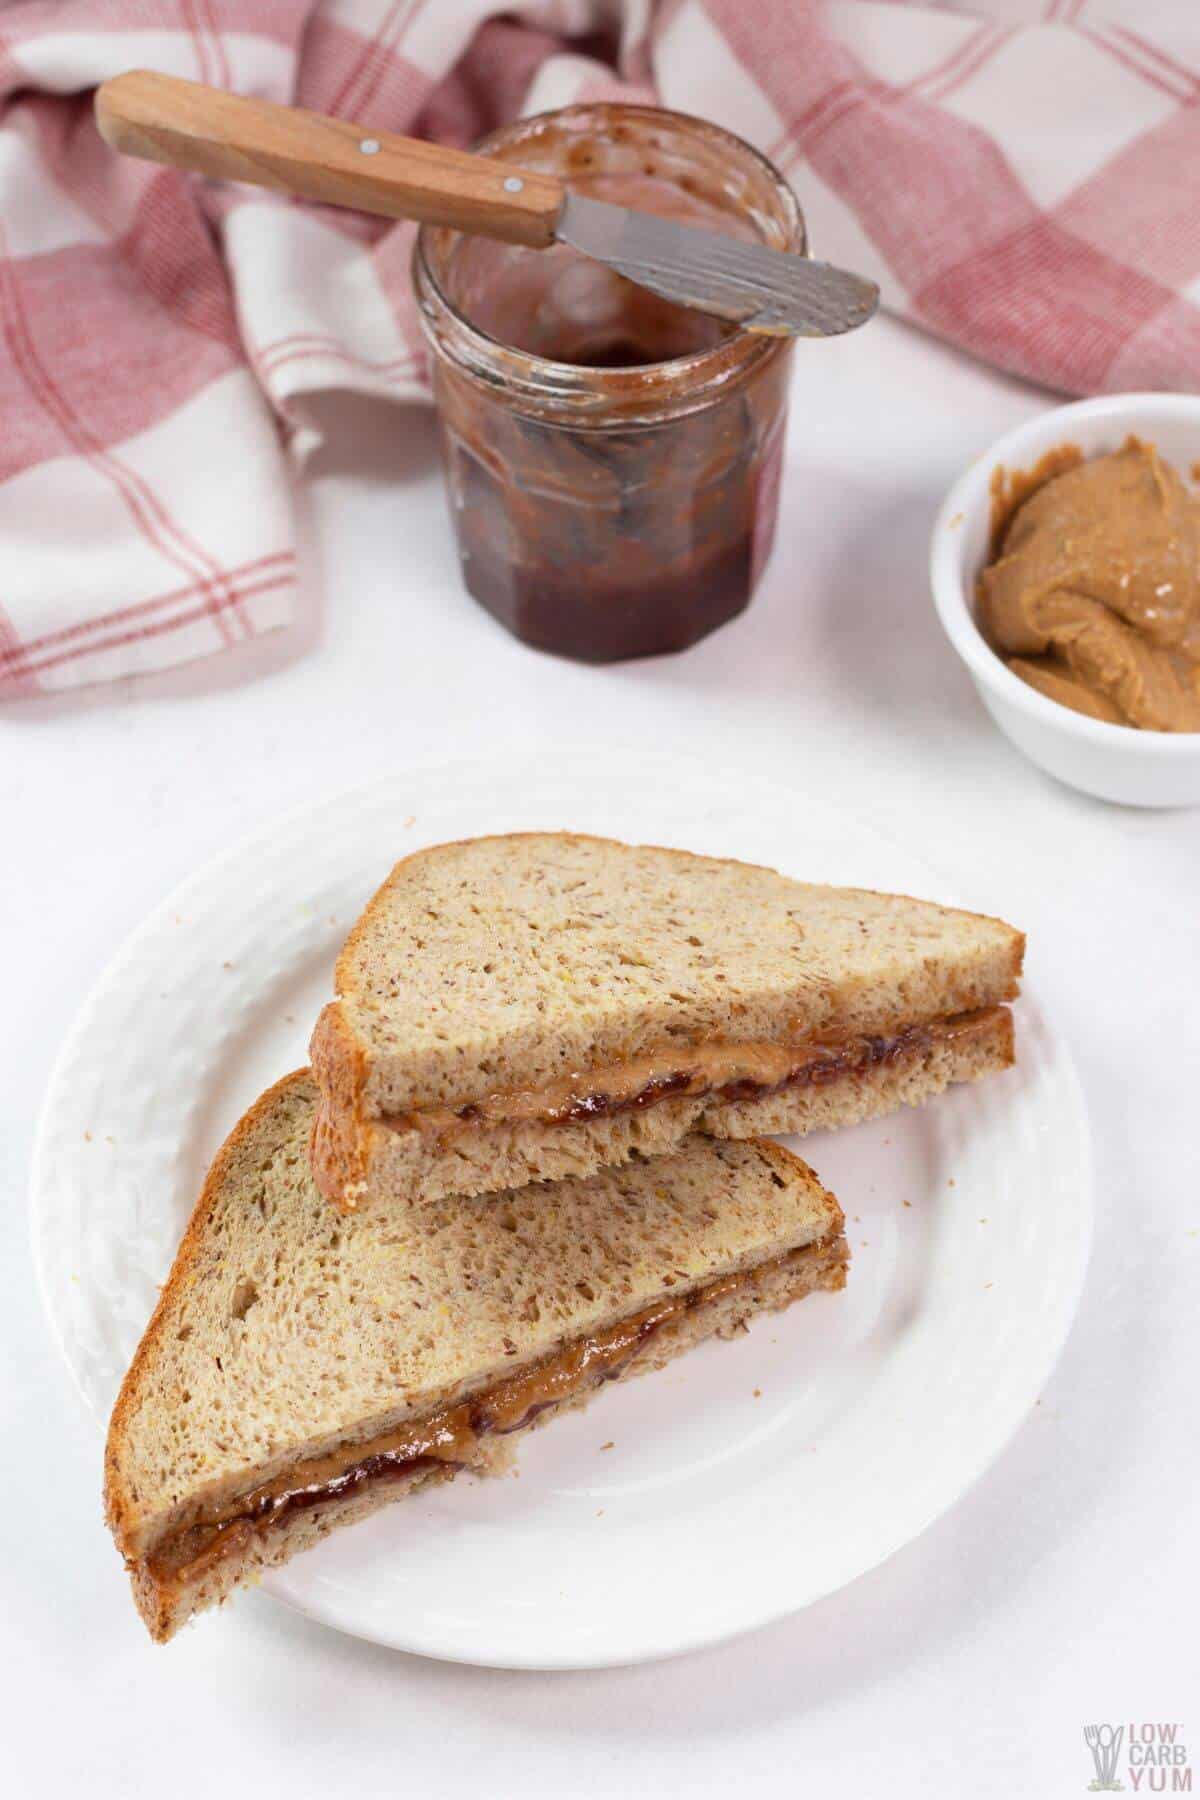 sliced peanut butter and jelly sandwich with jelly jar and peanut butter bowl.